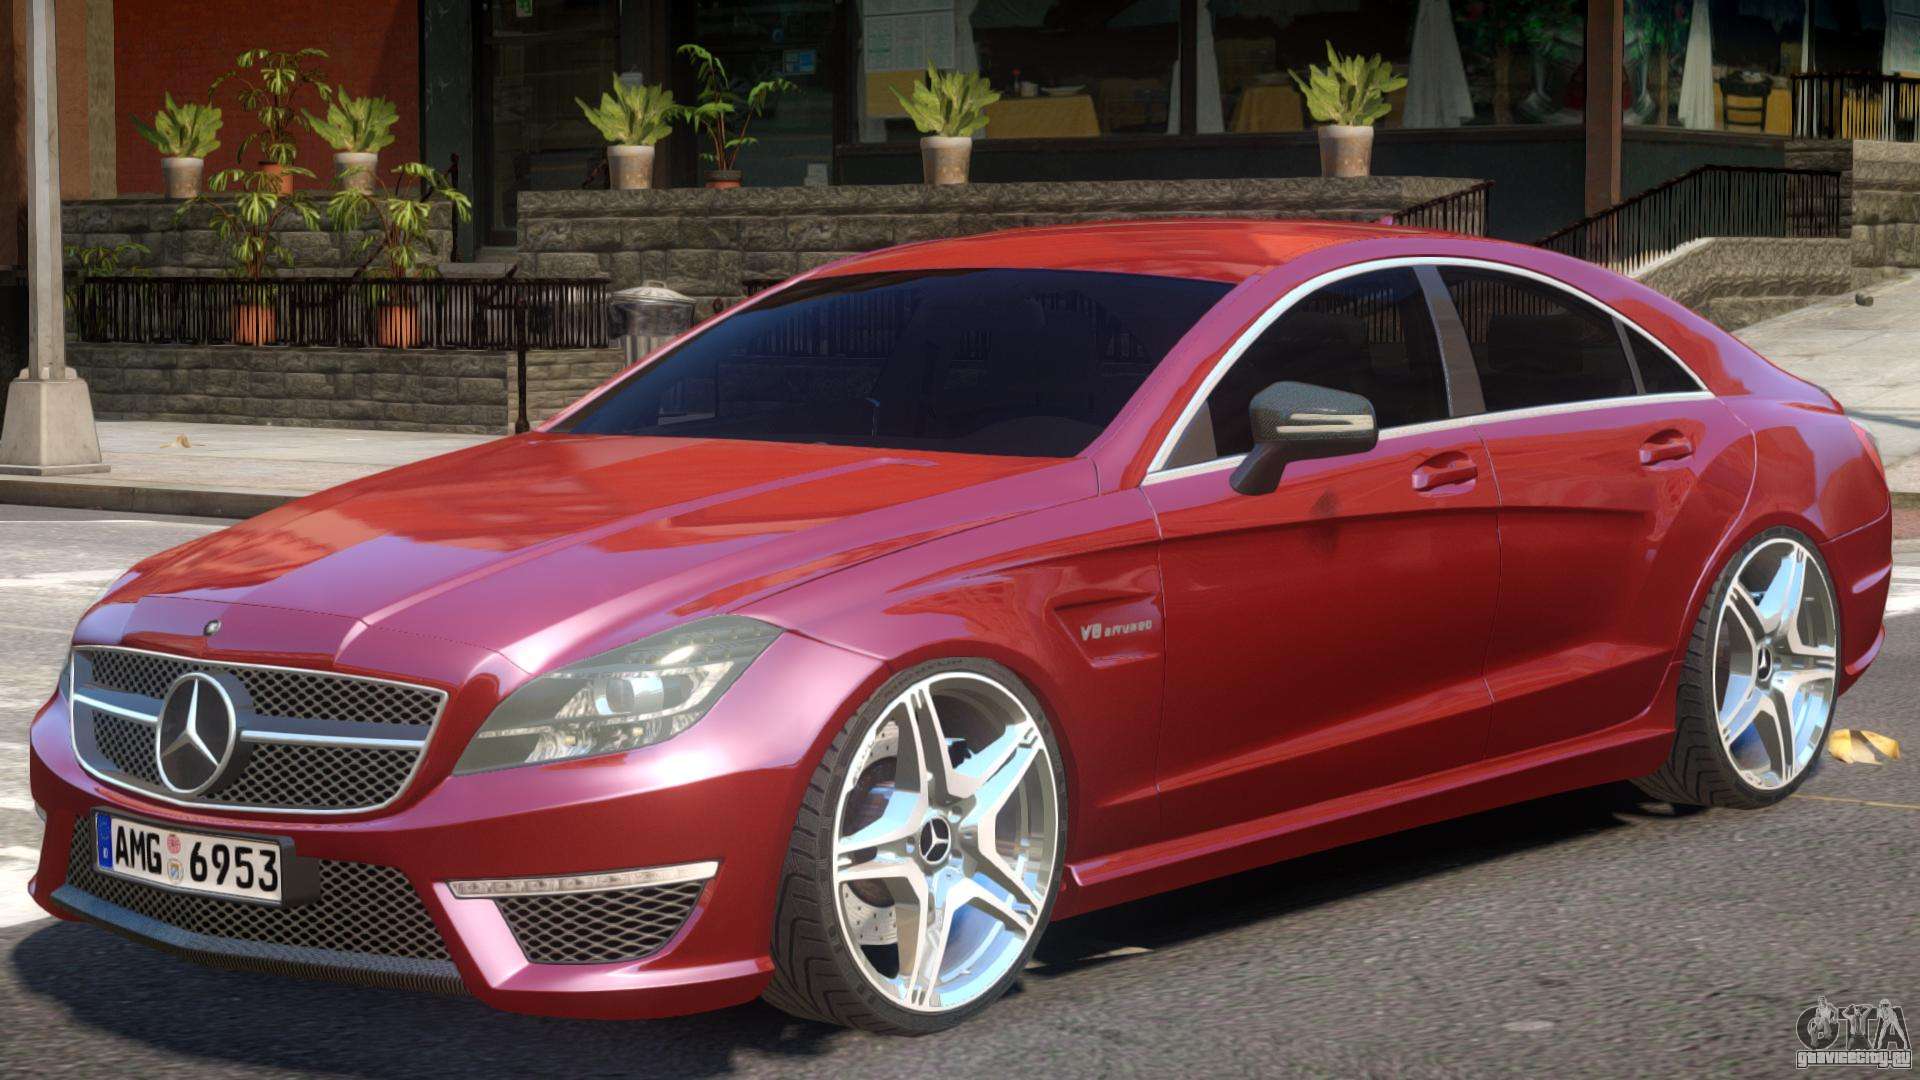 Cls lolz x64 exe. Мерседес ЦЛС 63 АМГ. Мерседес CLS 63 2021. Мерседес CLS 63 AMG 2021. Mercedes CLS 6.3 AMG.